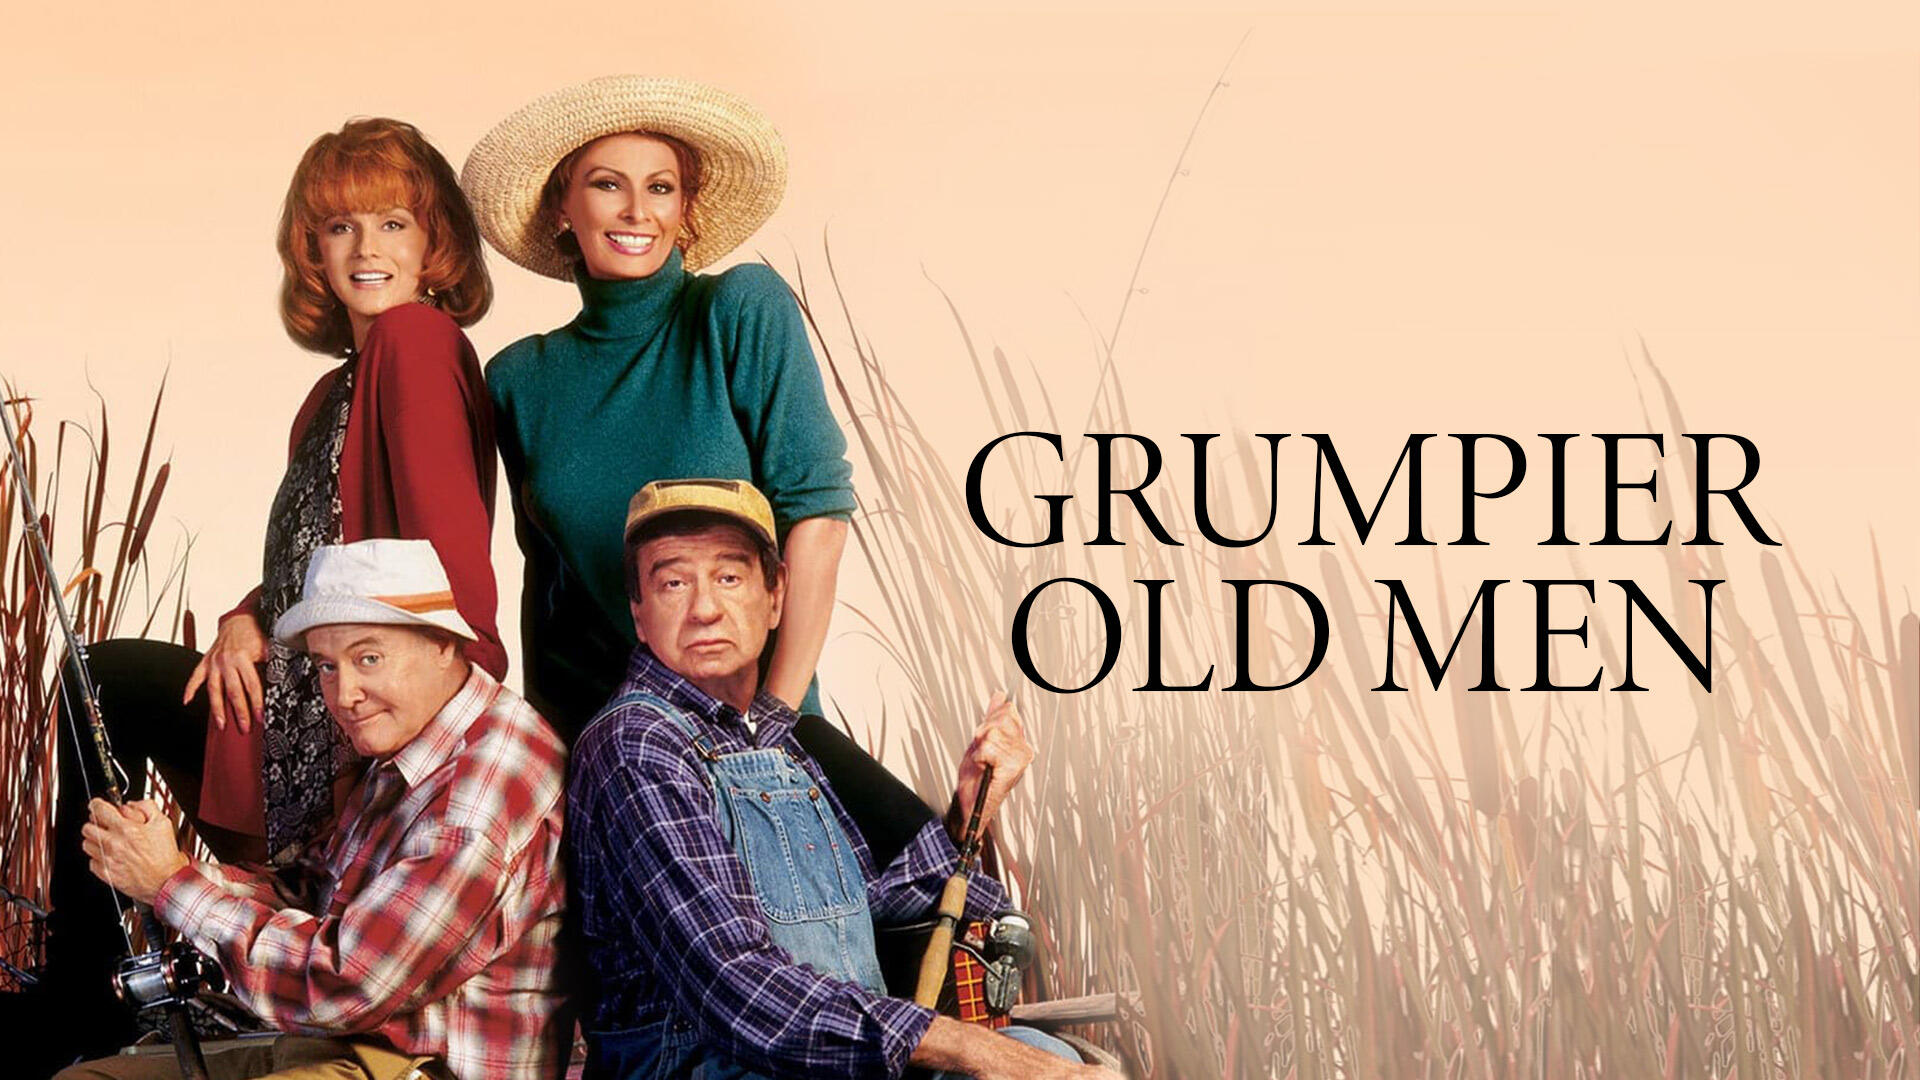 36-facts-about-the-movie-grumpier-old-men